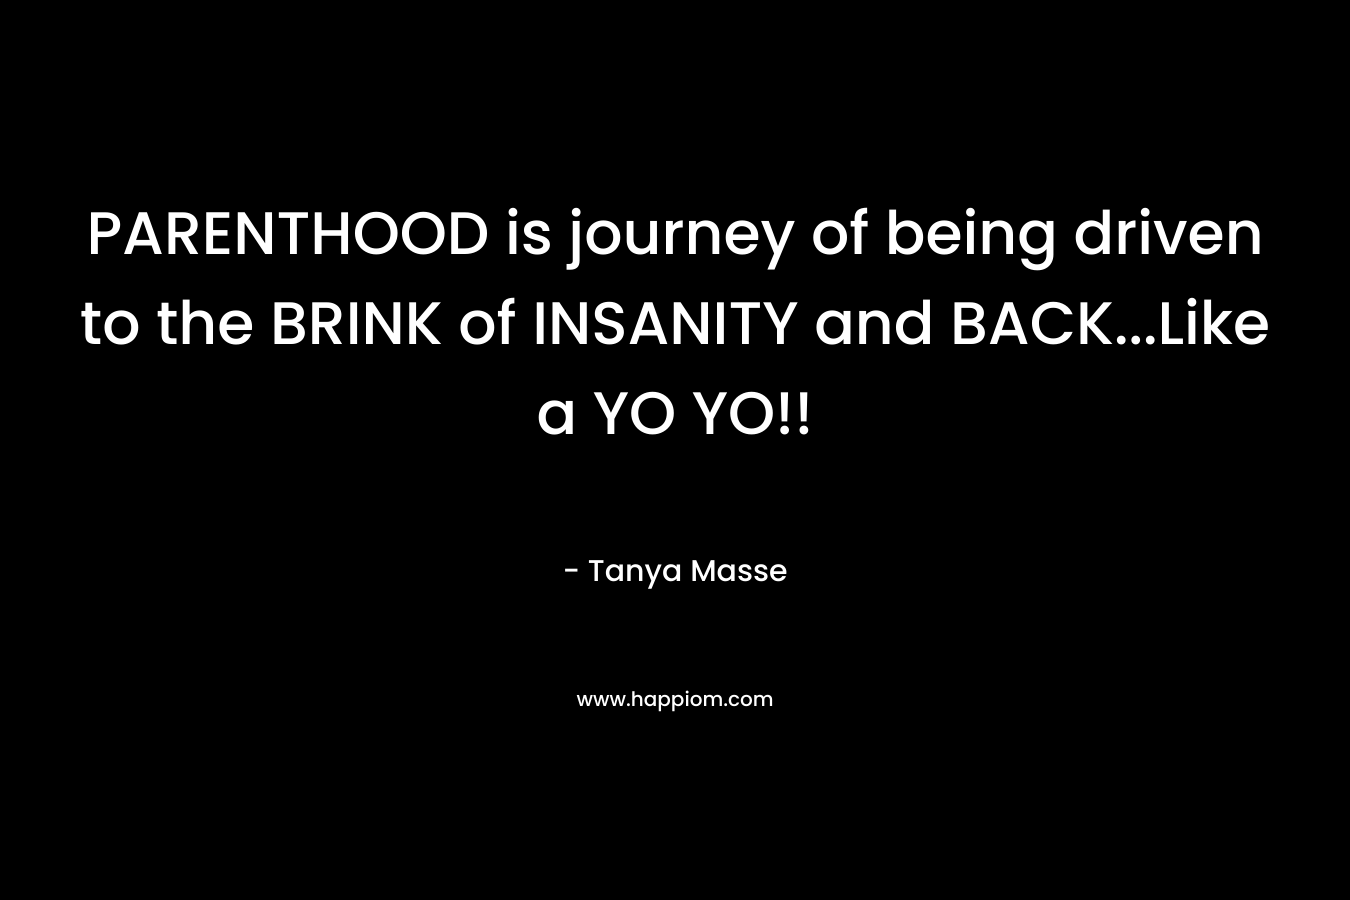 PARENTHOOD is journey of being driven to the BRINK of INSANITY and BACK...Like a YO YO!!